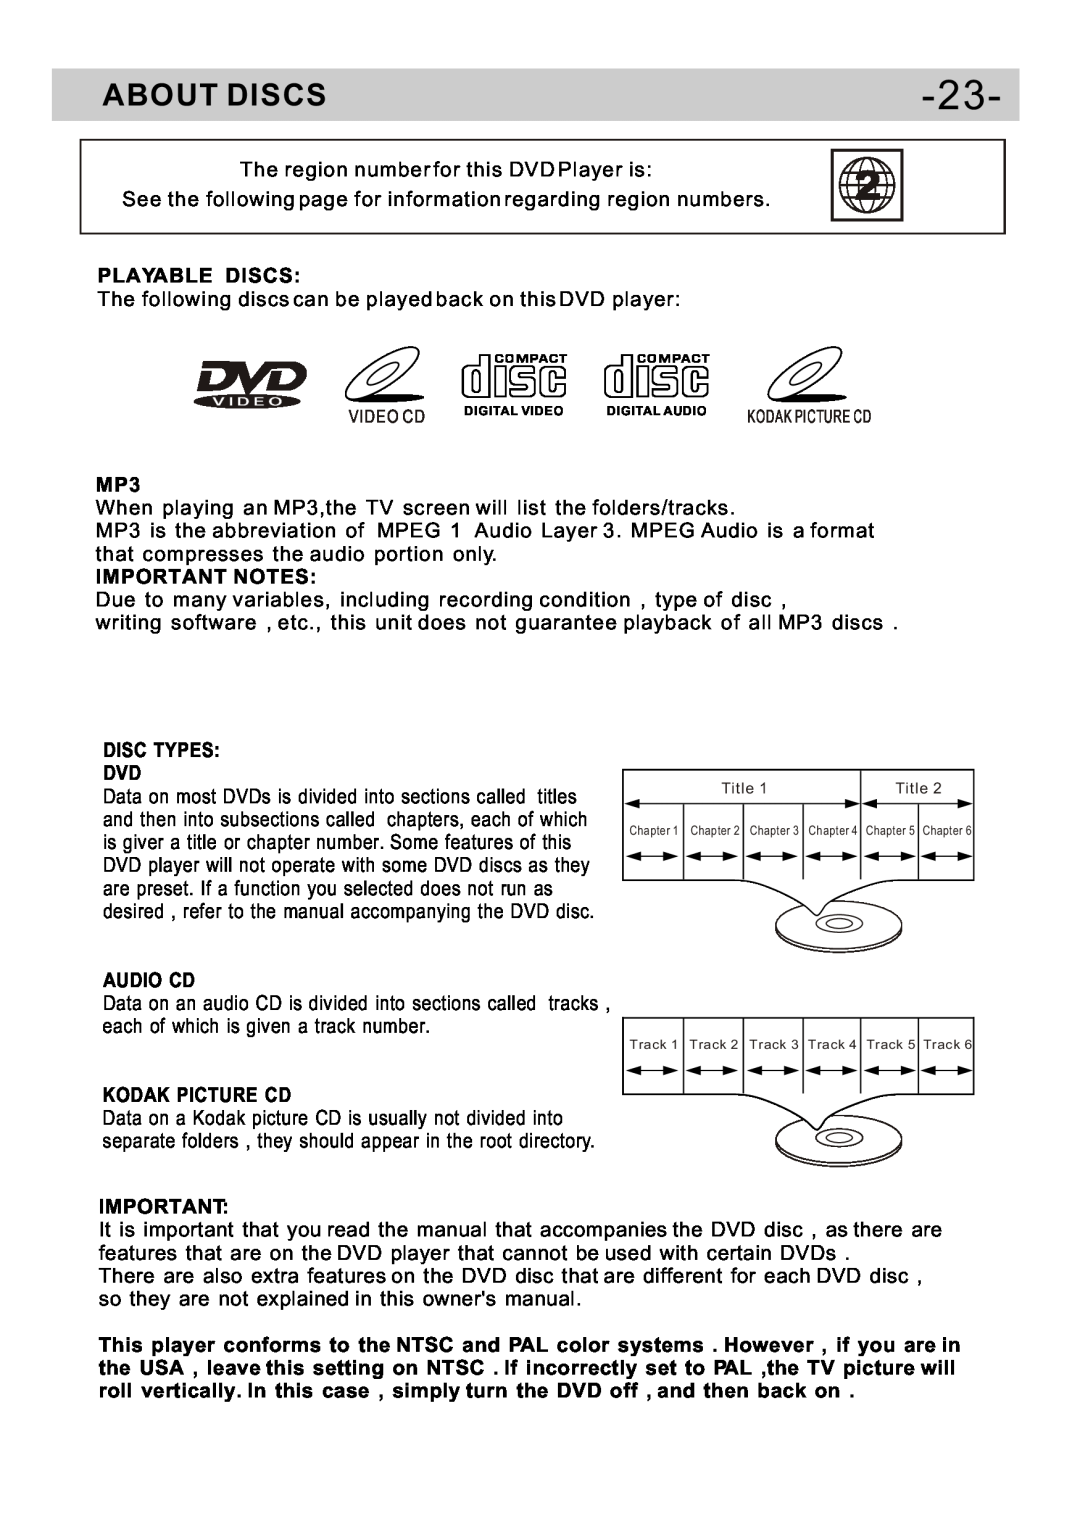 Curtis DVD5091UK user manual About Discs, Playable Discs, Important Notes, Disc Types Dvd, Audio Cd, Kodak Picture Cd 